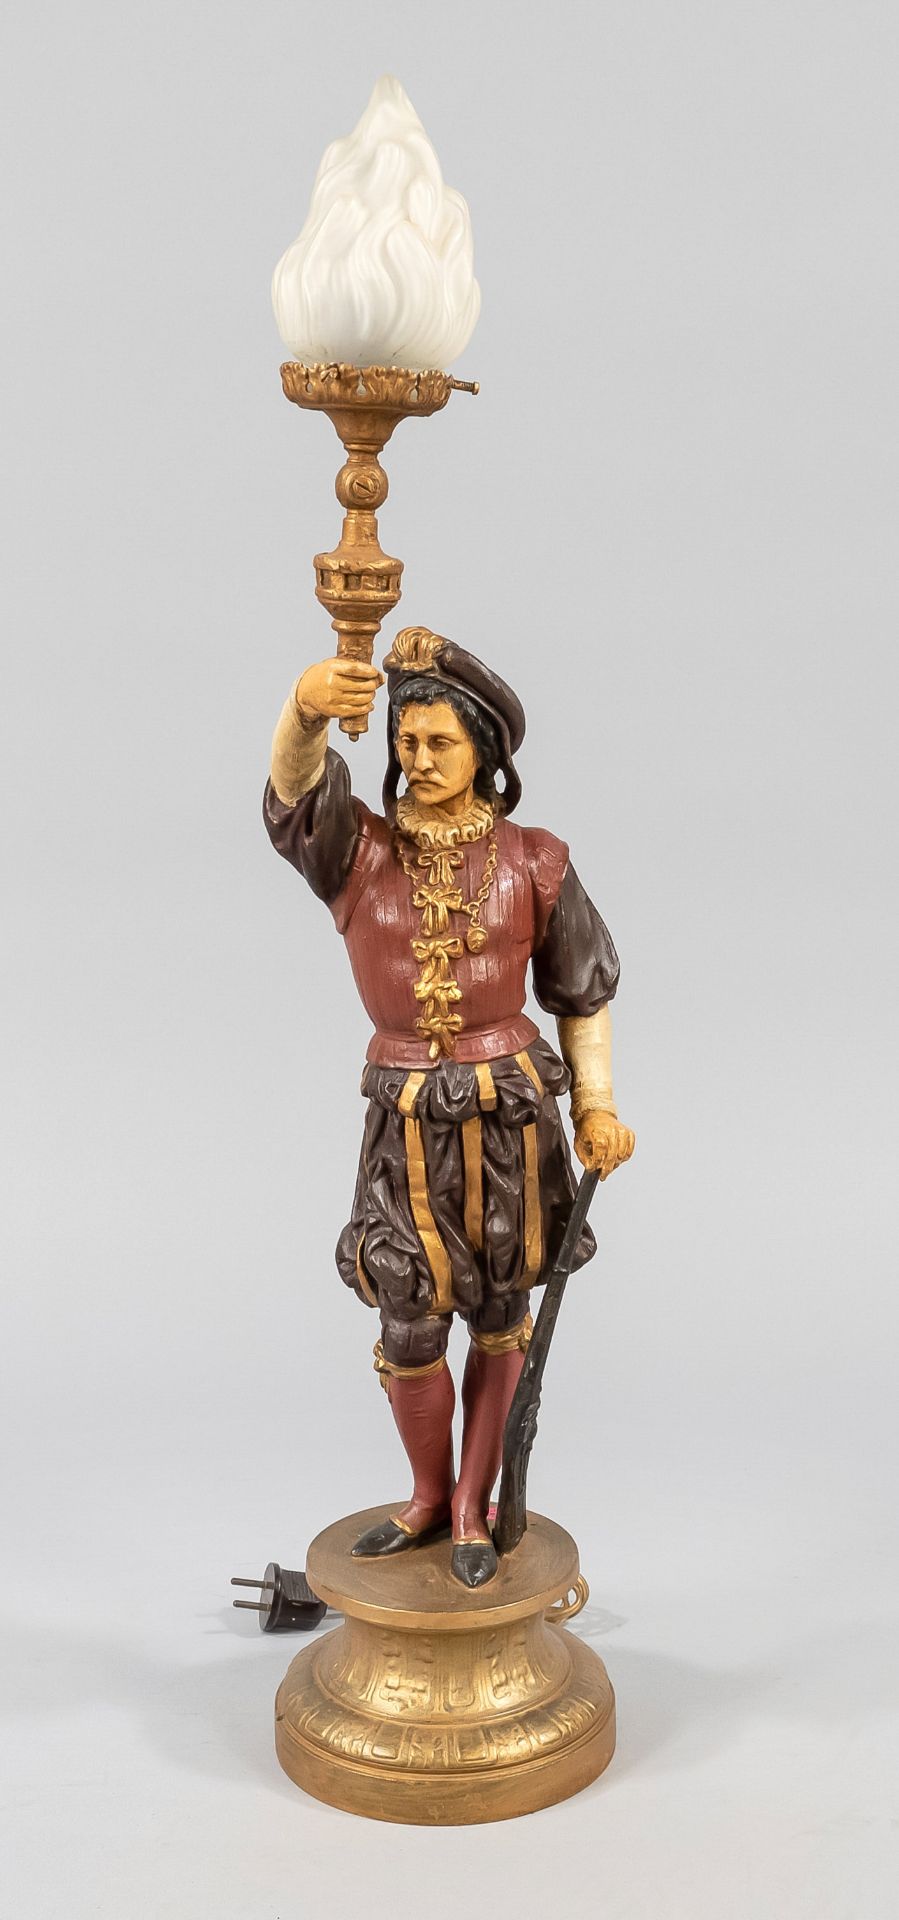 Figural lamp, 19th/20th century, polychrome painted metal casting. Musketeer on round pedestal, milk